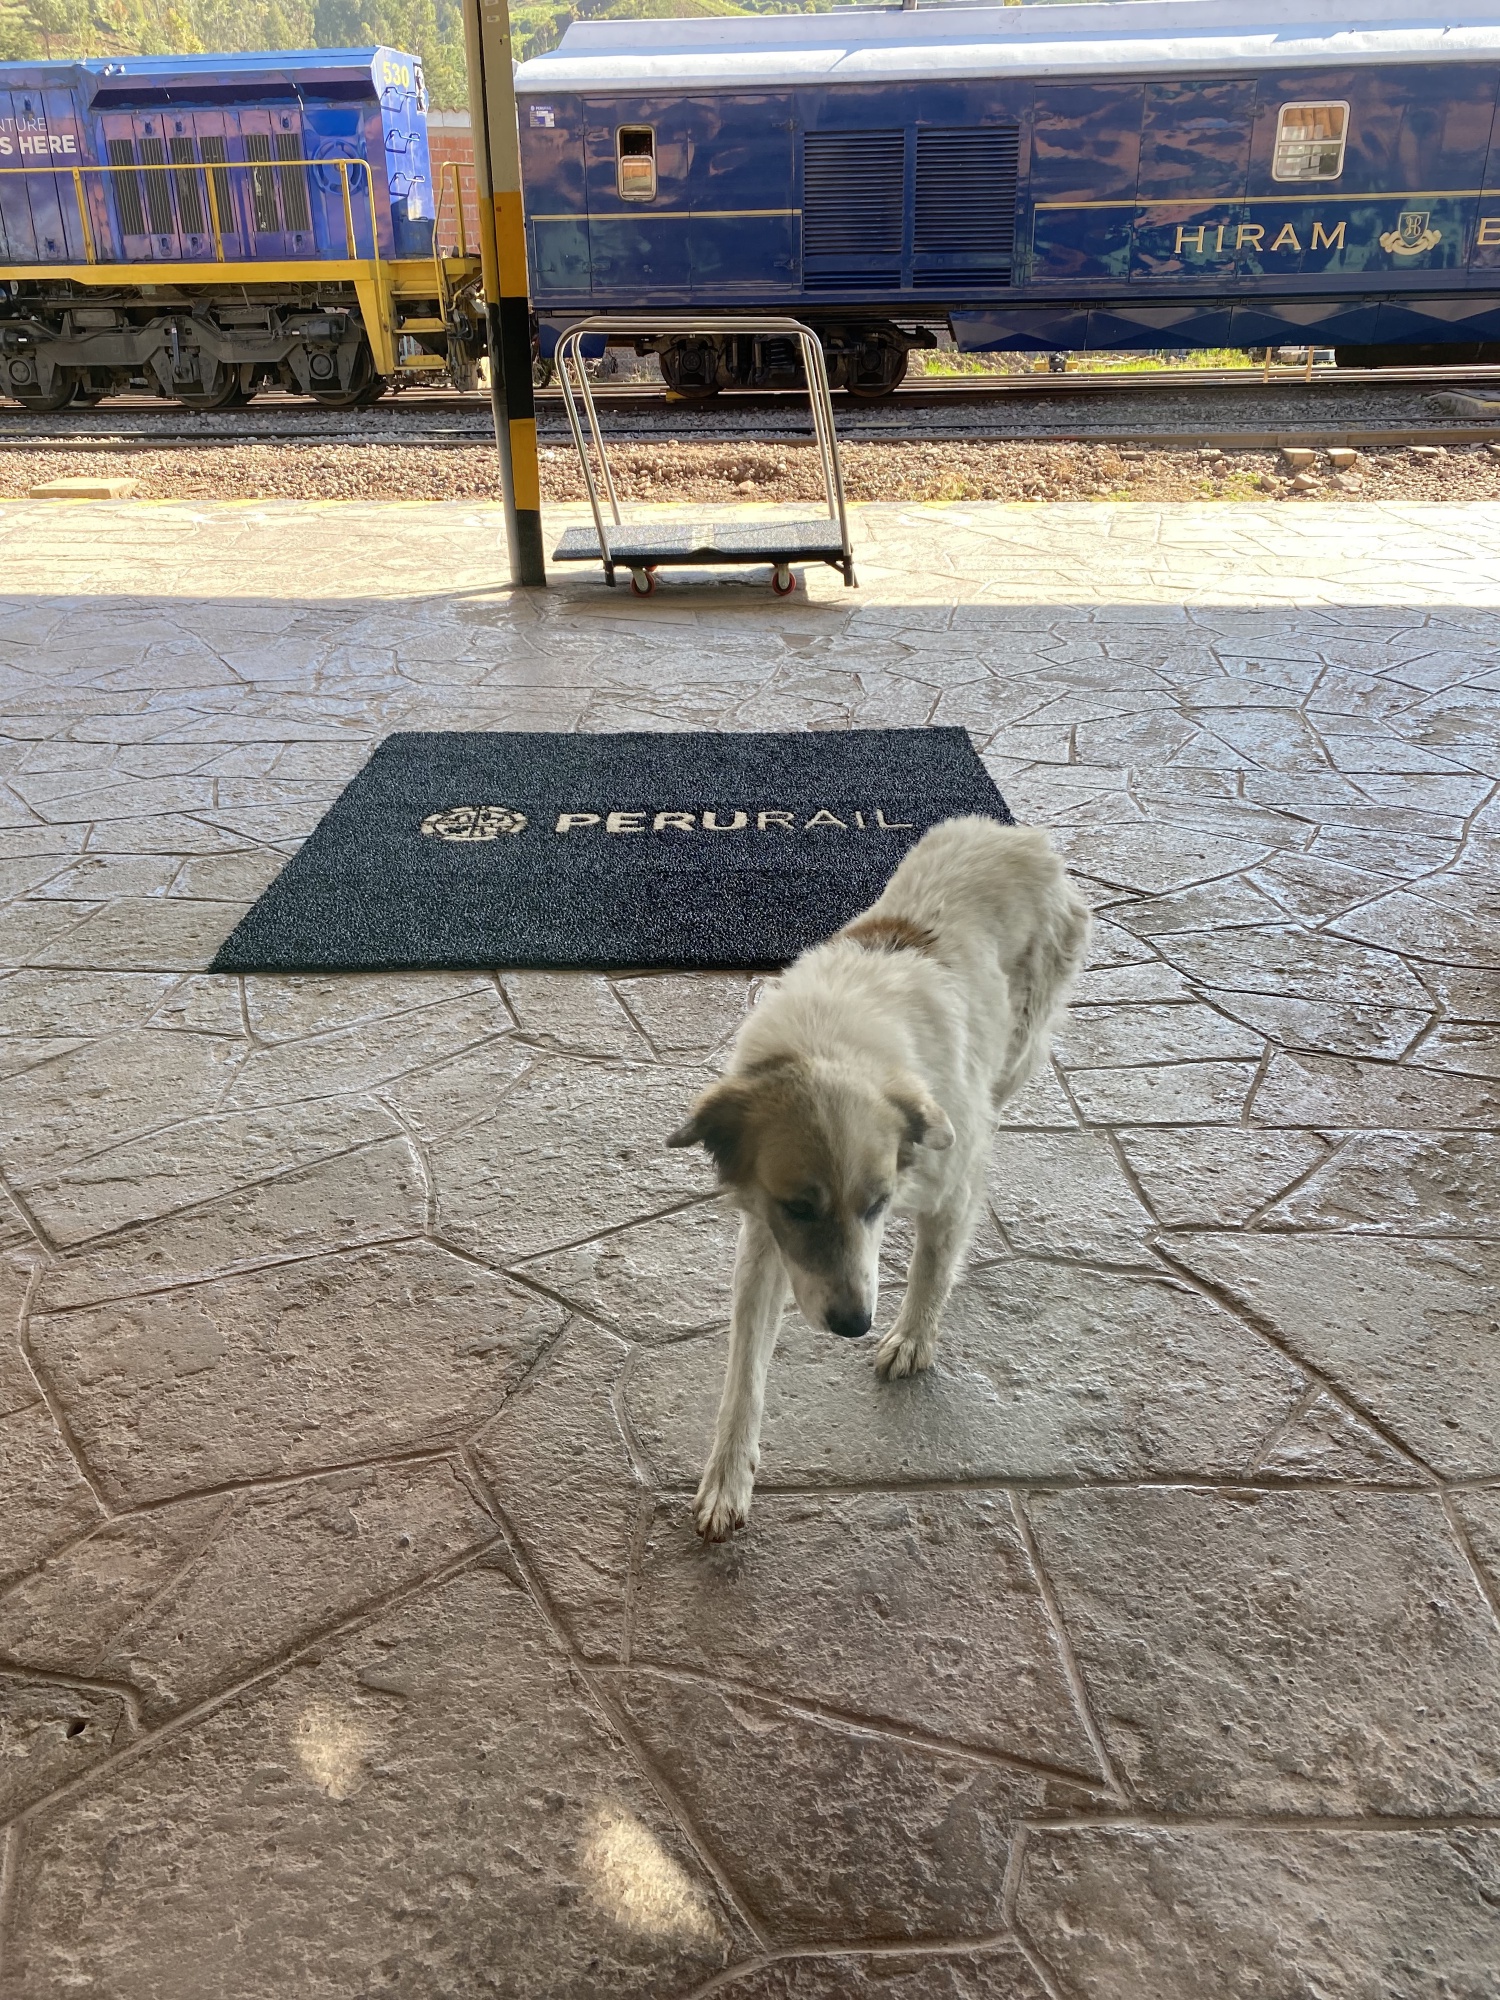 The train is named after Hiram Bingham, the American who rediscovered the abandoned Machu Picchu in 1911 - Hello Doggo!